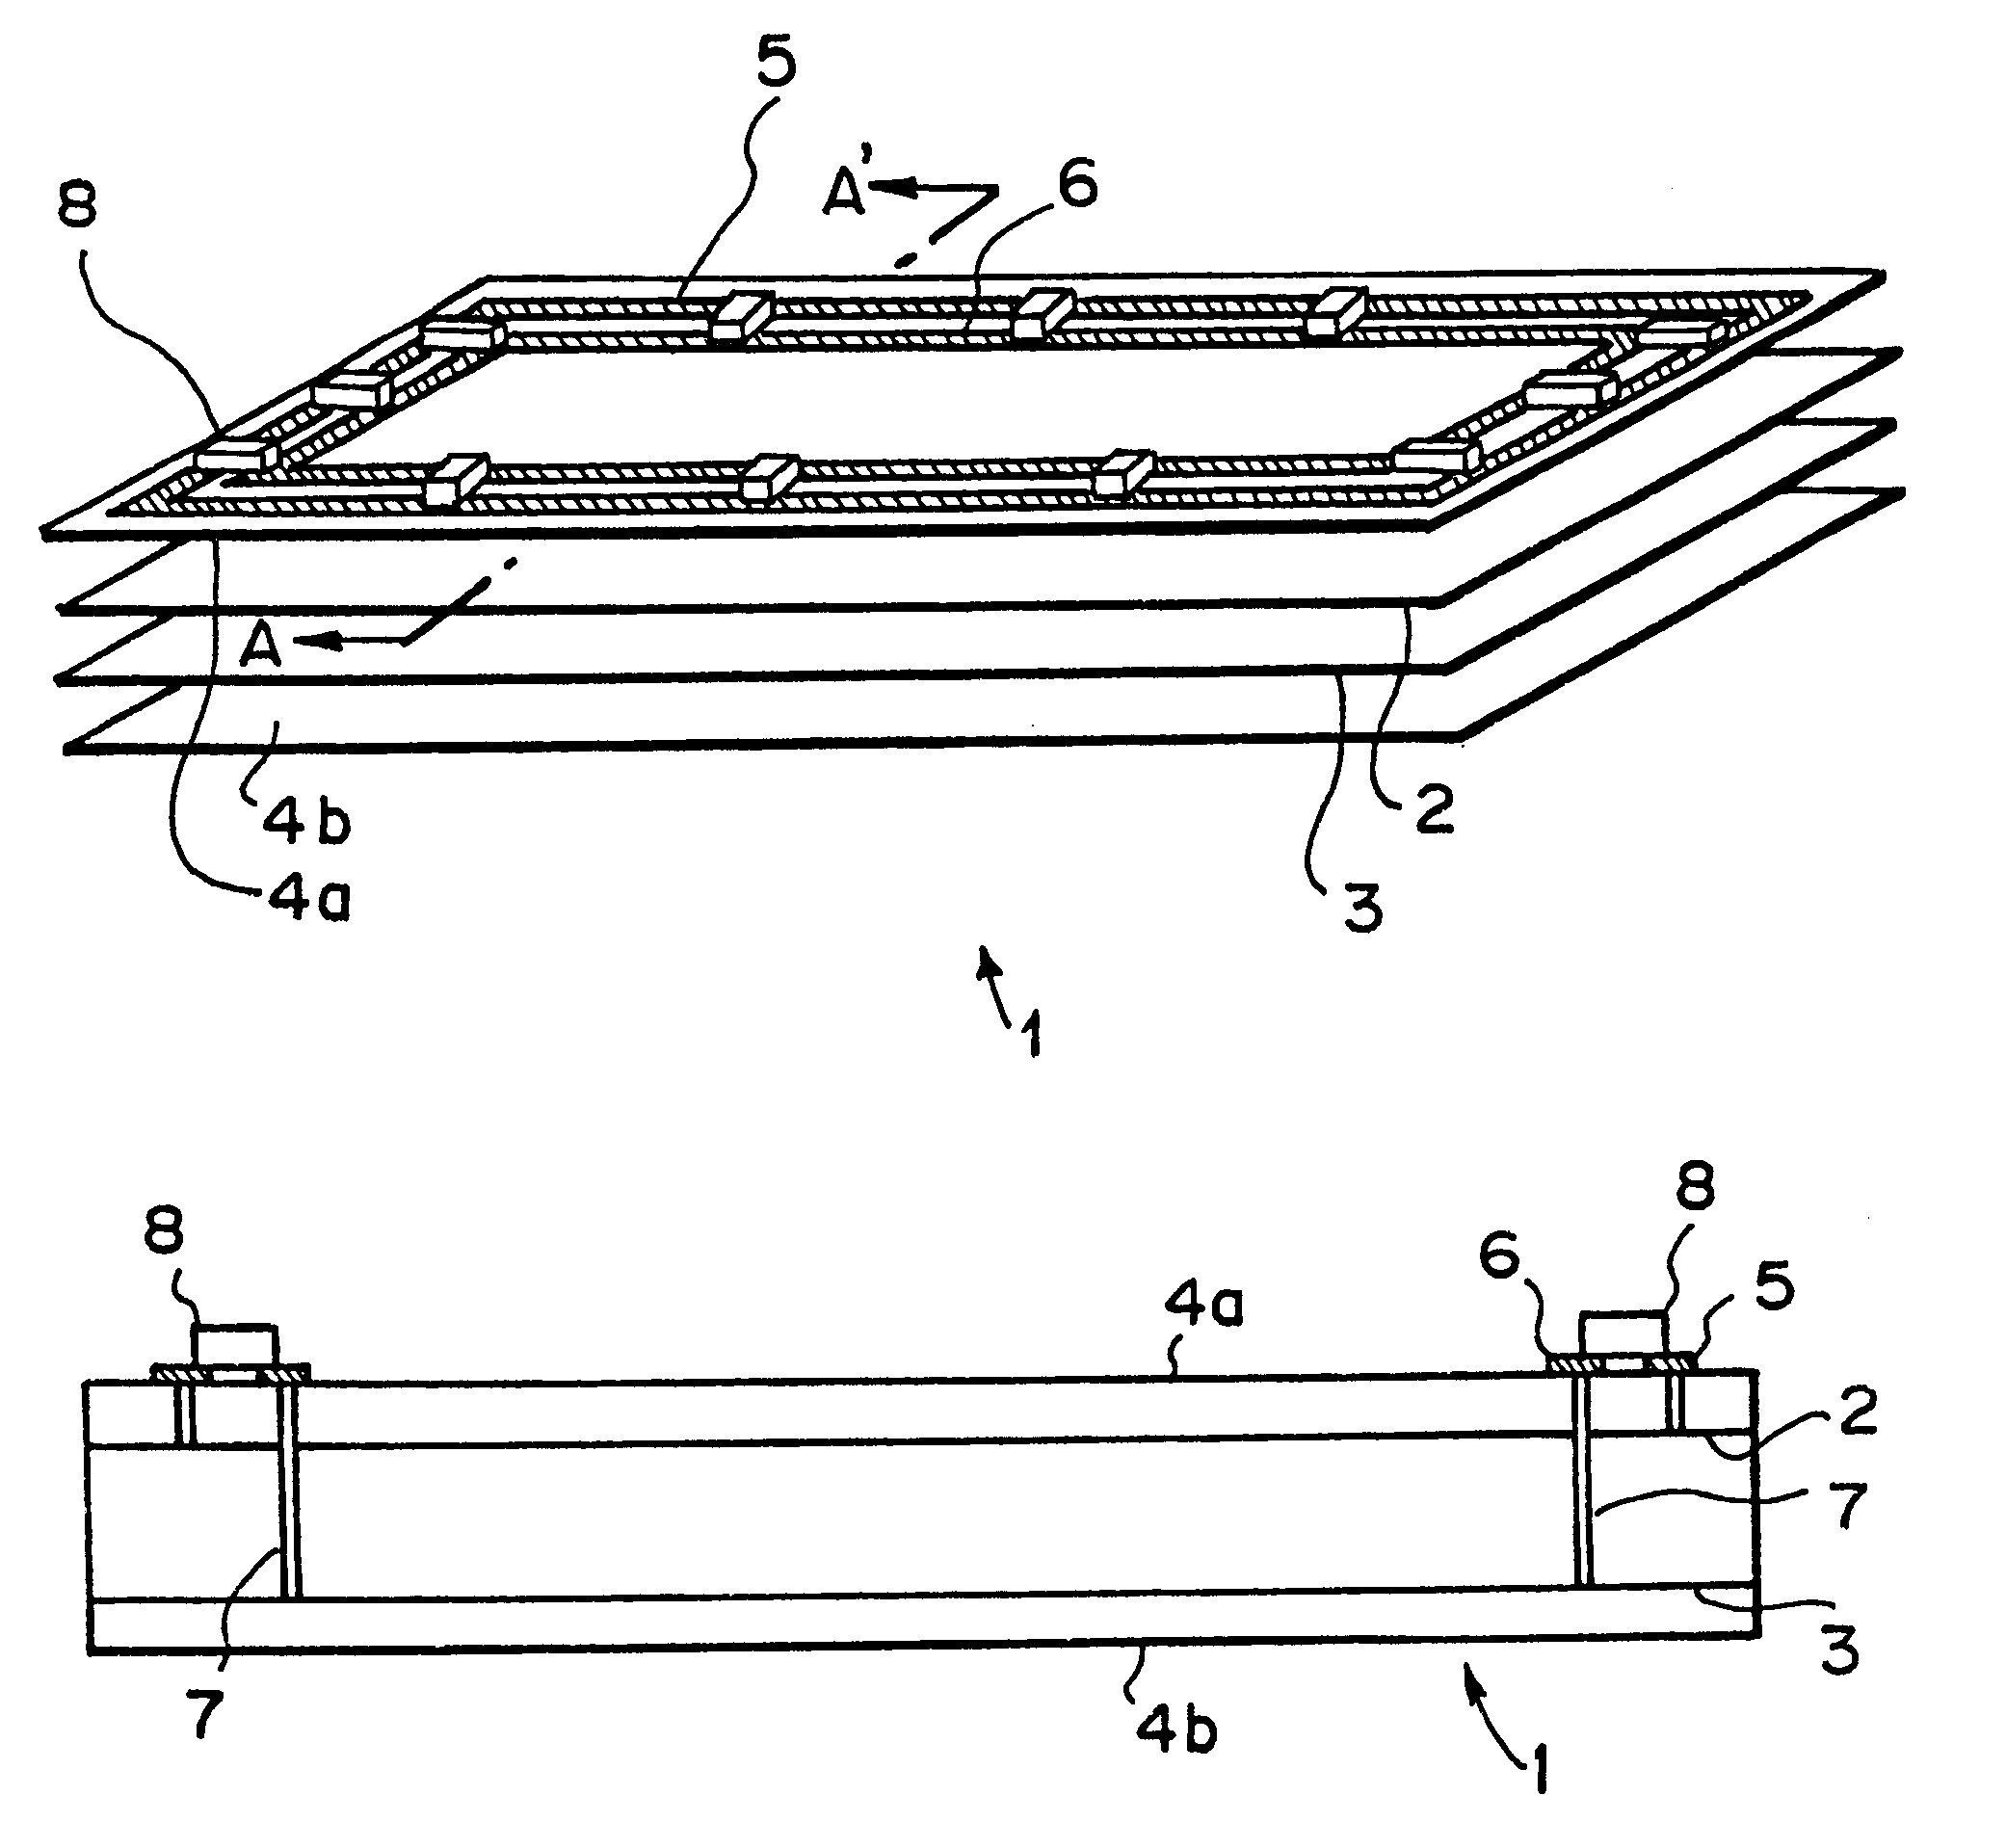 Printed circuit board with capacitors connected between ground layer and power layer patterns